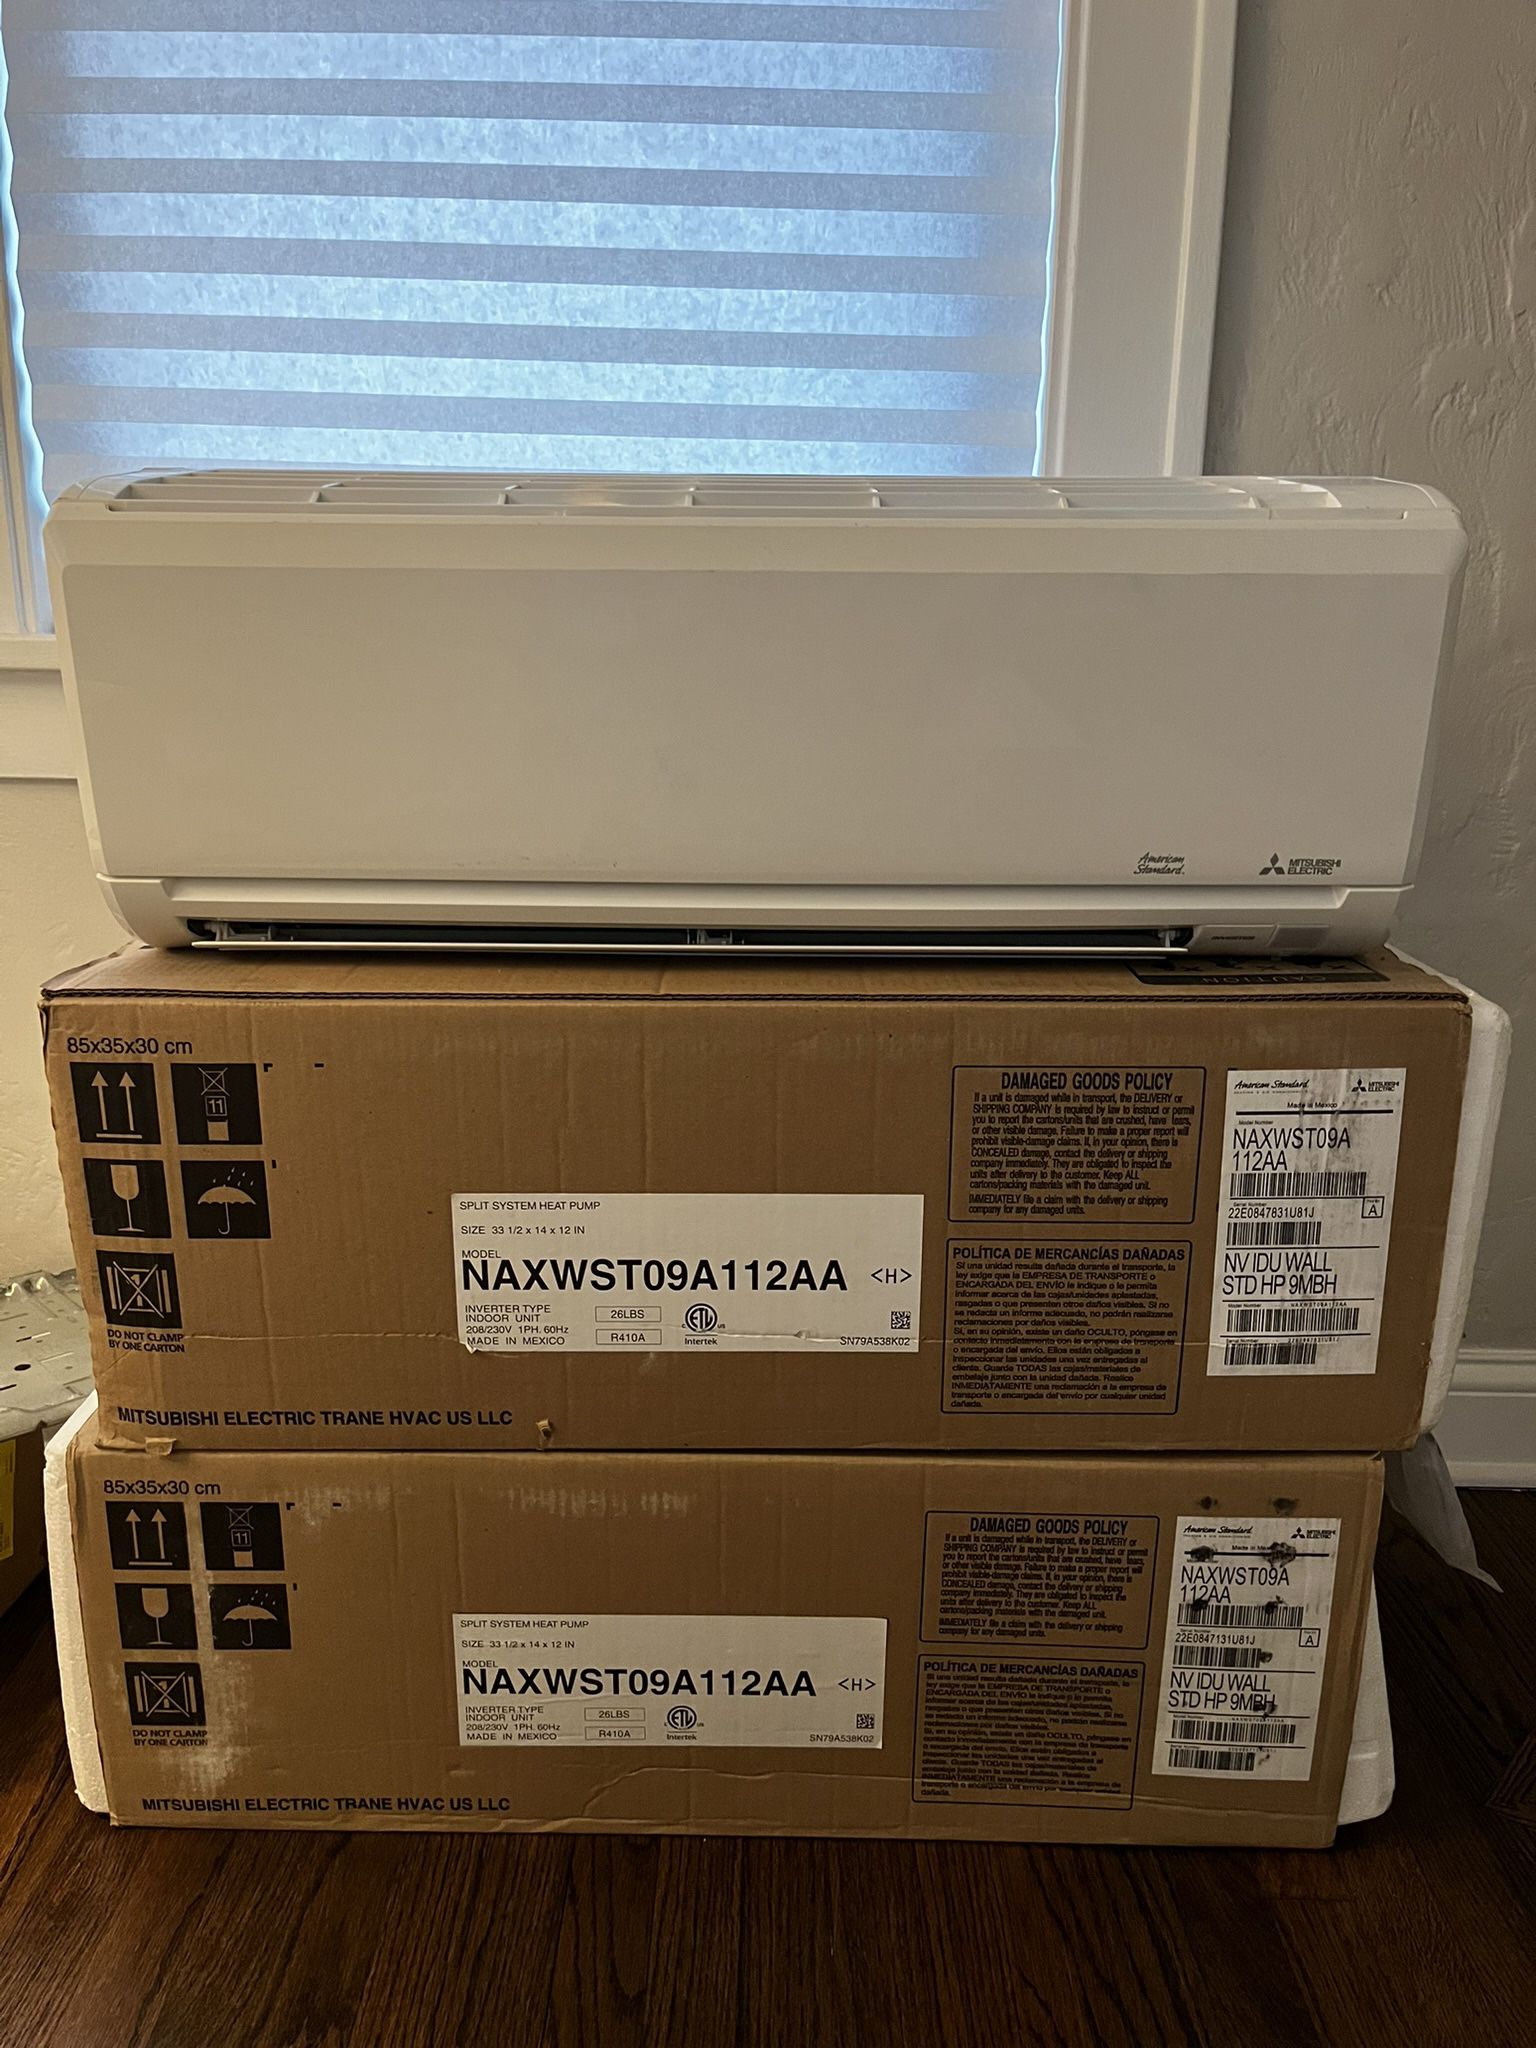 American Standard / Mitsubishi Electric Split-Type Air Conditioners